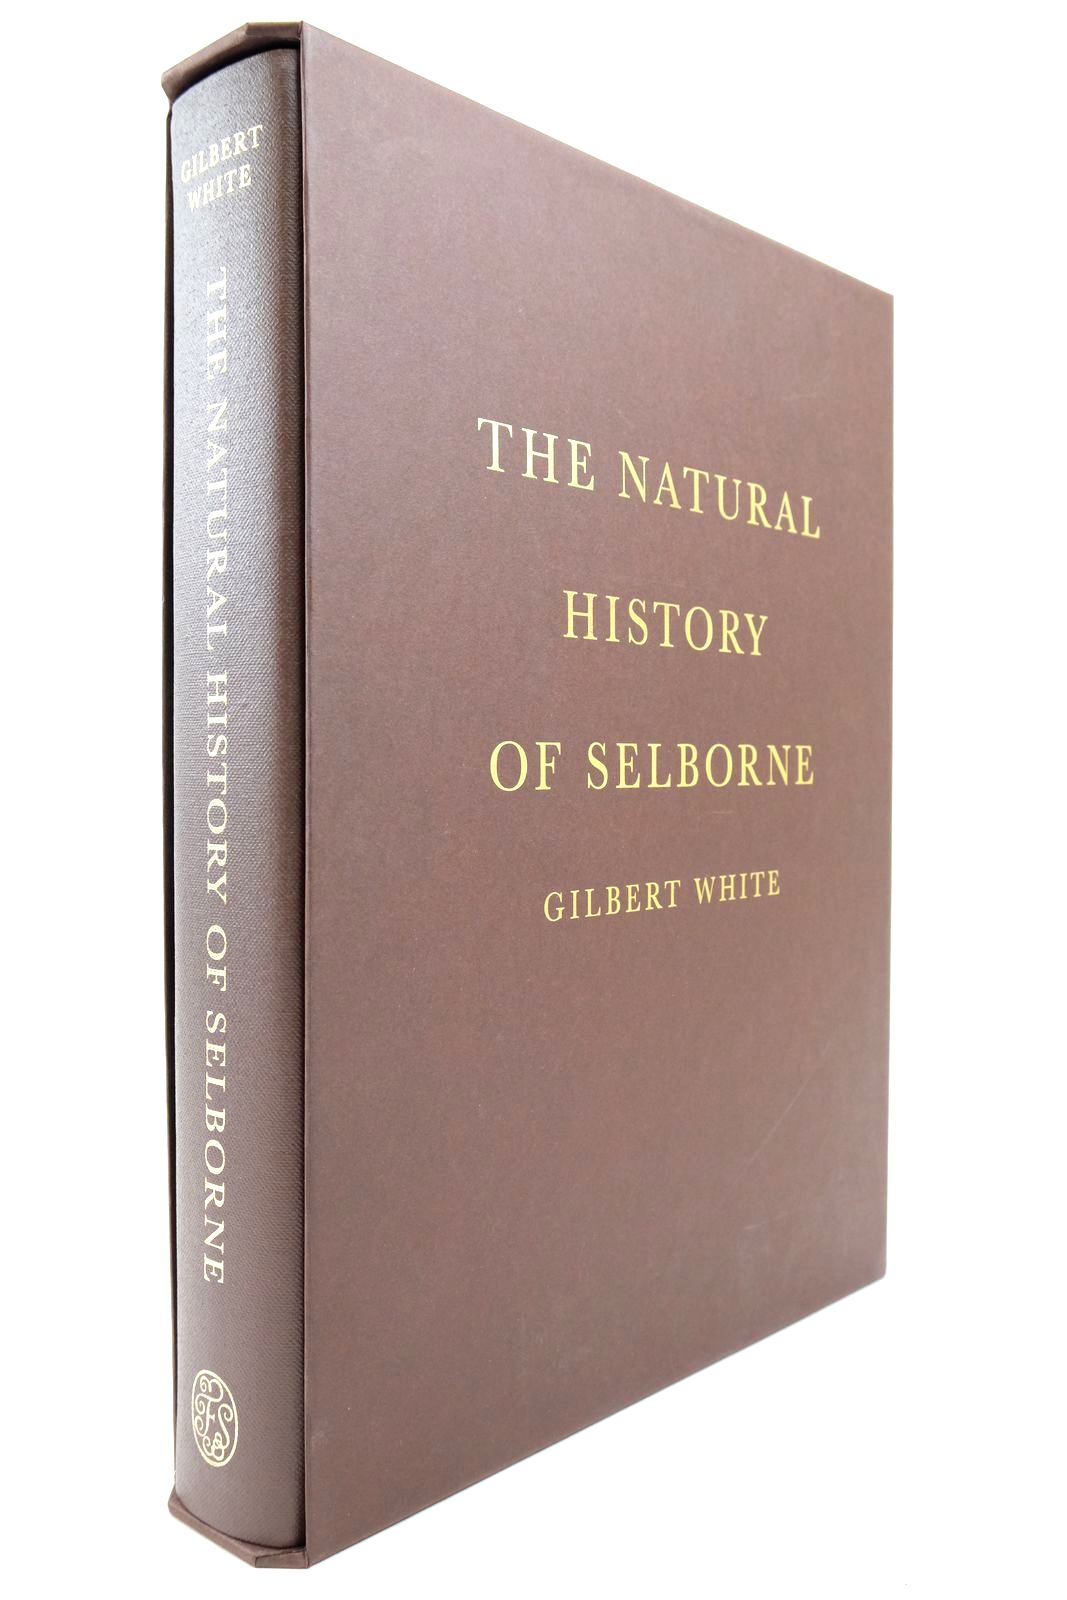 Photo of THE NATURAL HISTORY OF SELBORNE written by White, Gilbert Thomas, Keith published by Folio Society (STOCK CODE: 2140931)  for sale by Stella & Rose's Books